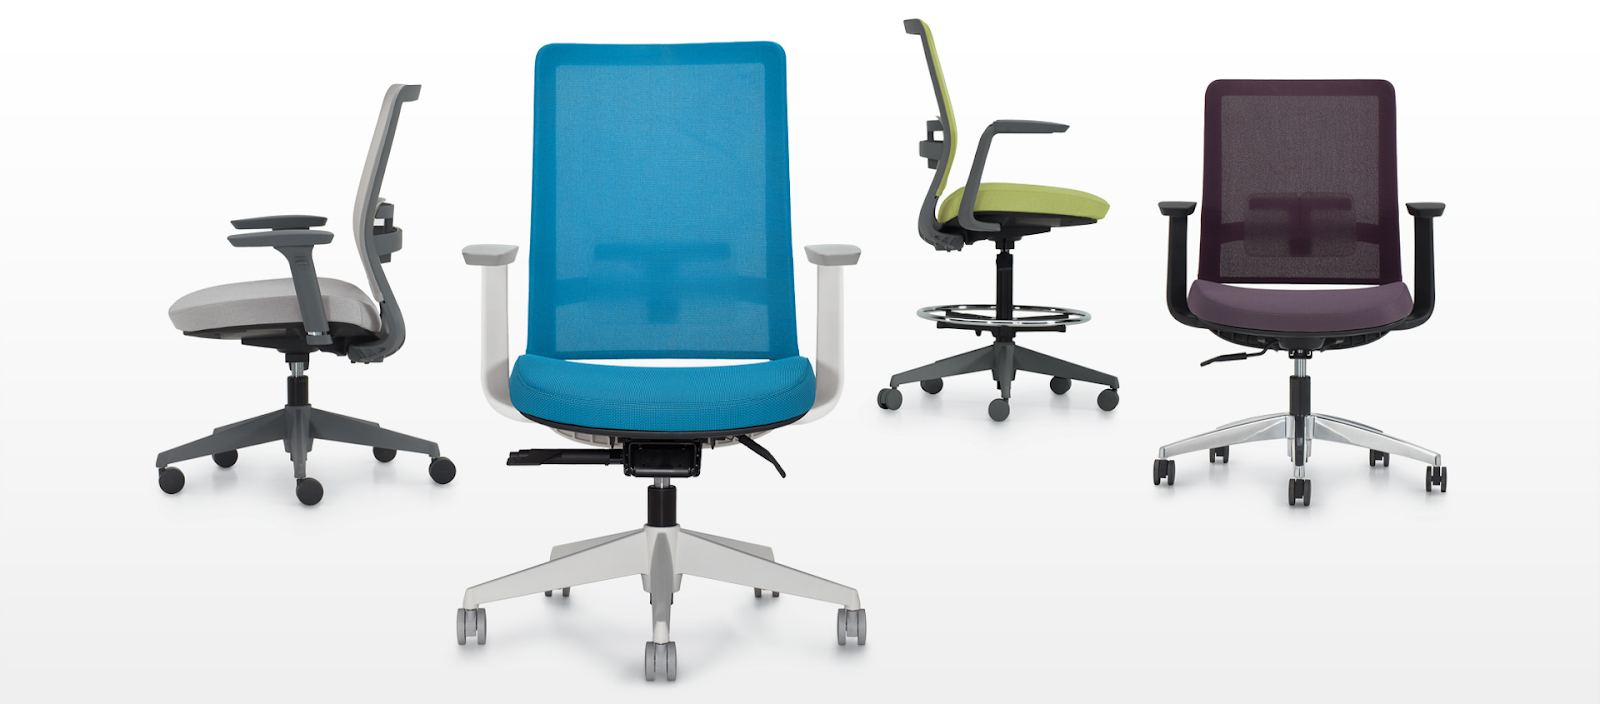 Factor Chairs